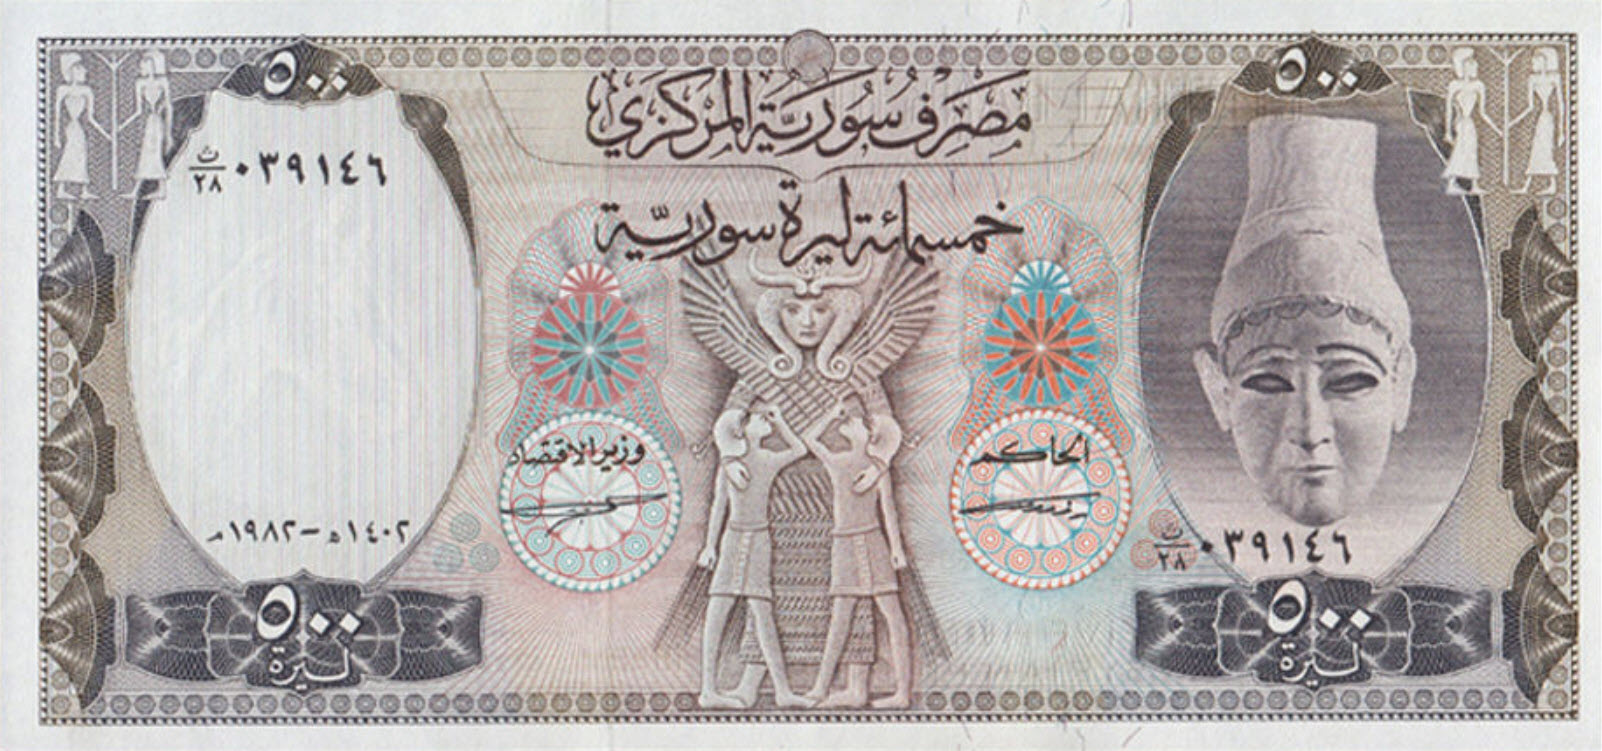 P105c Syria 500 Pounds Year 1990